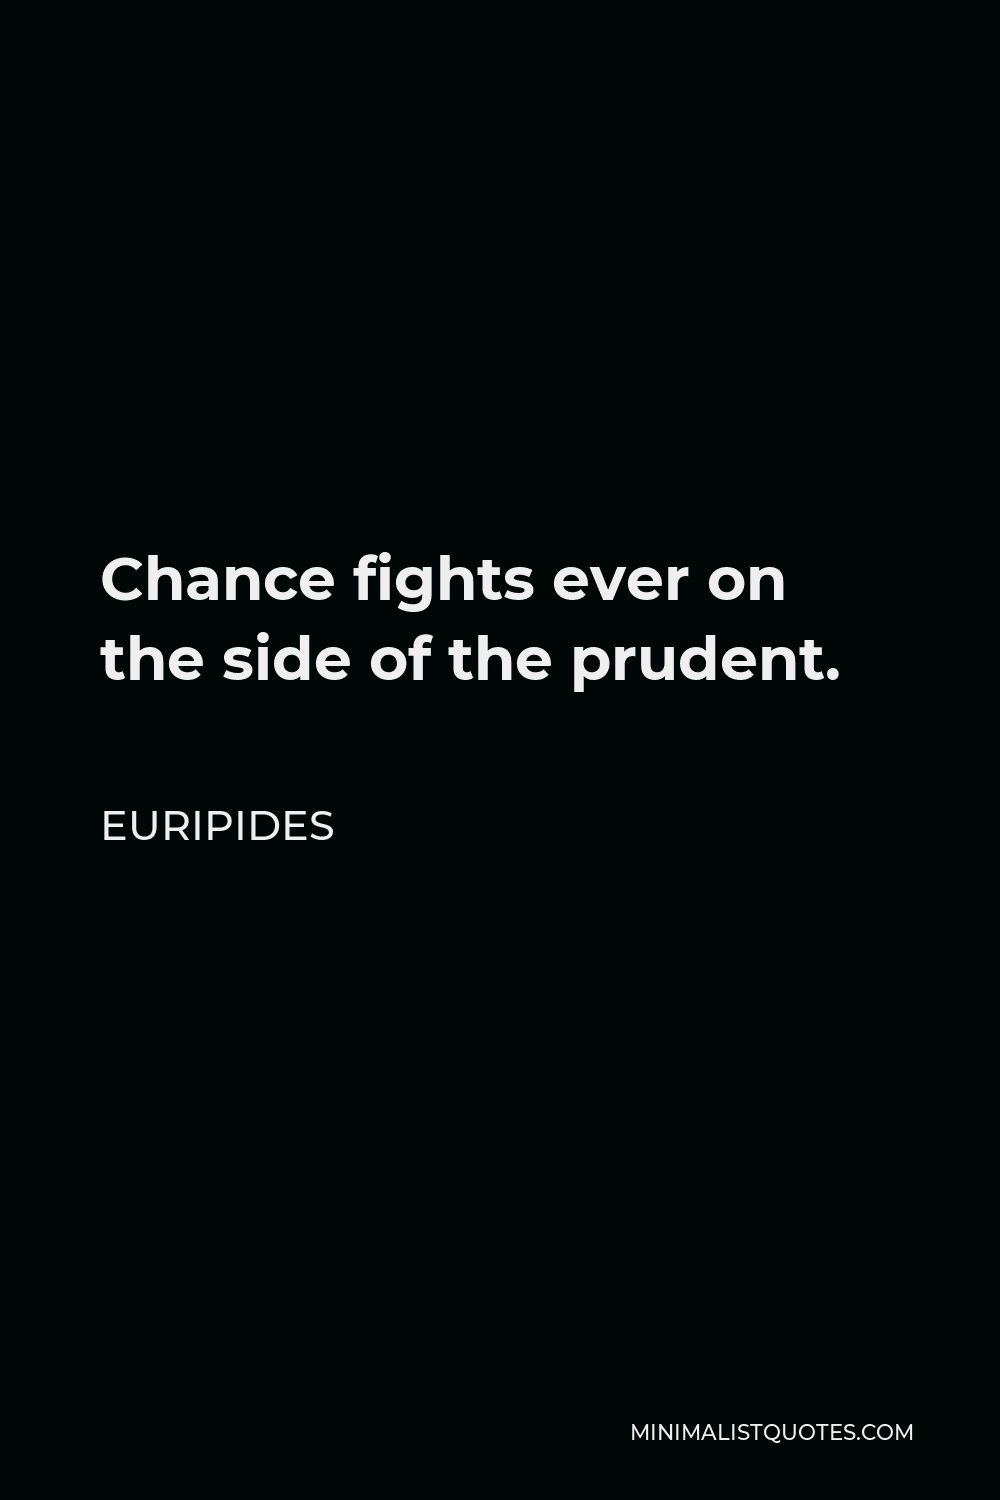 Euripides Quote - Chance fights ever on the side of the prudent.